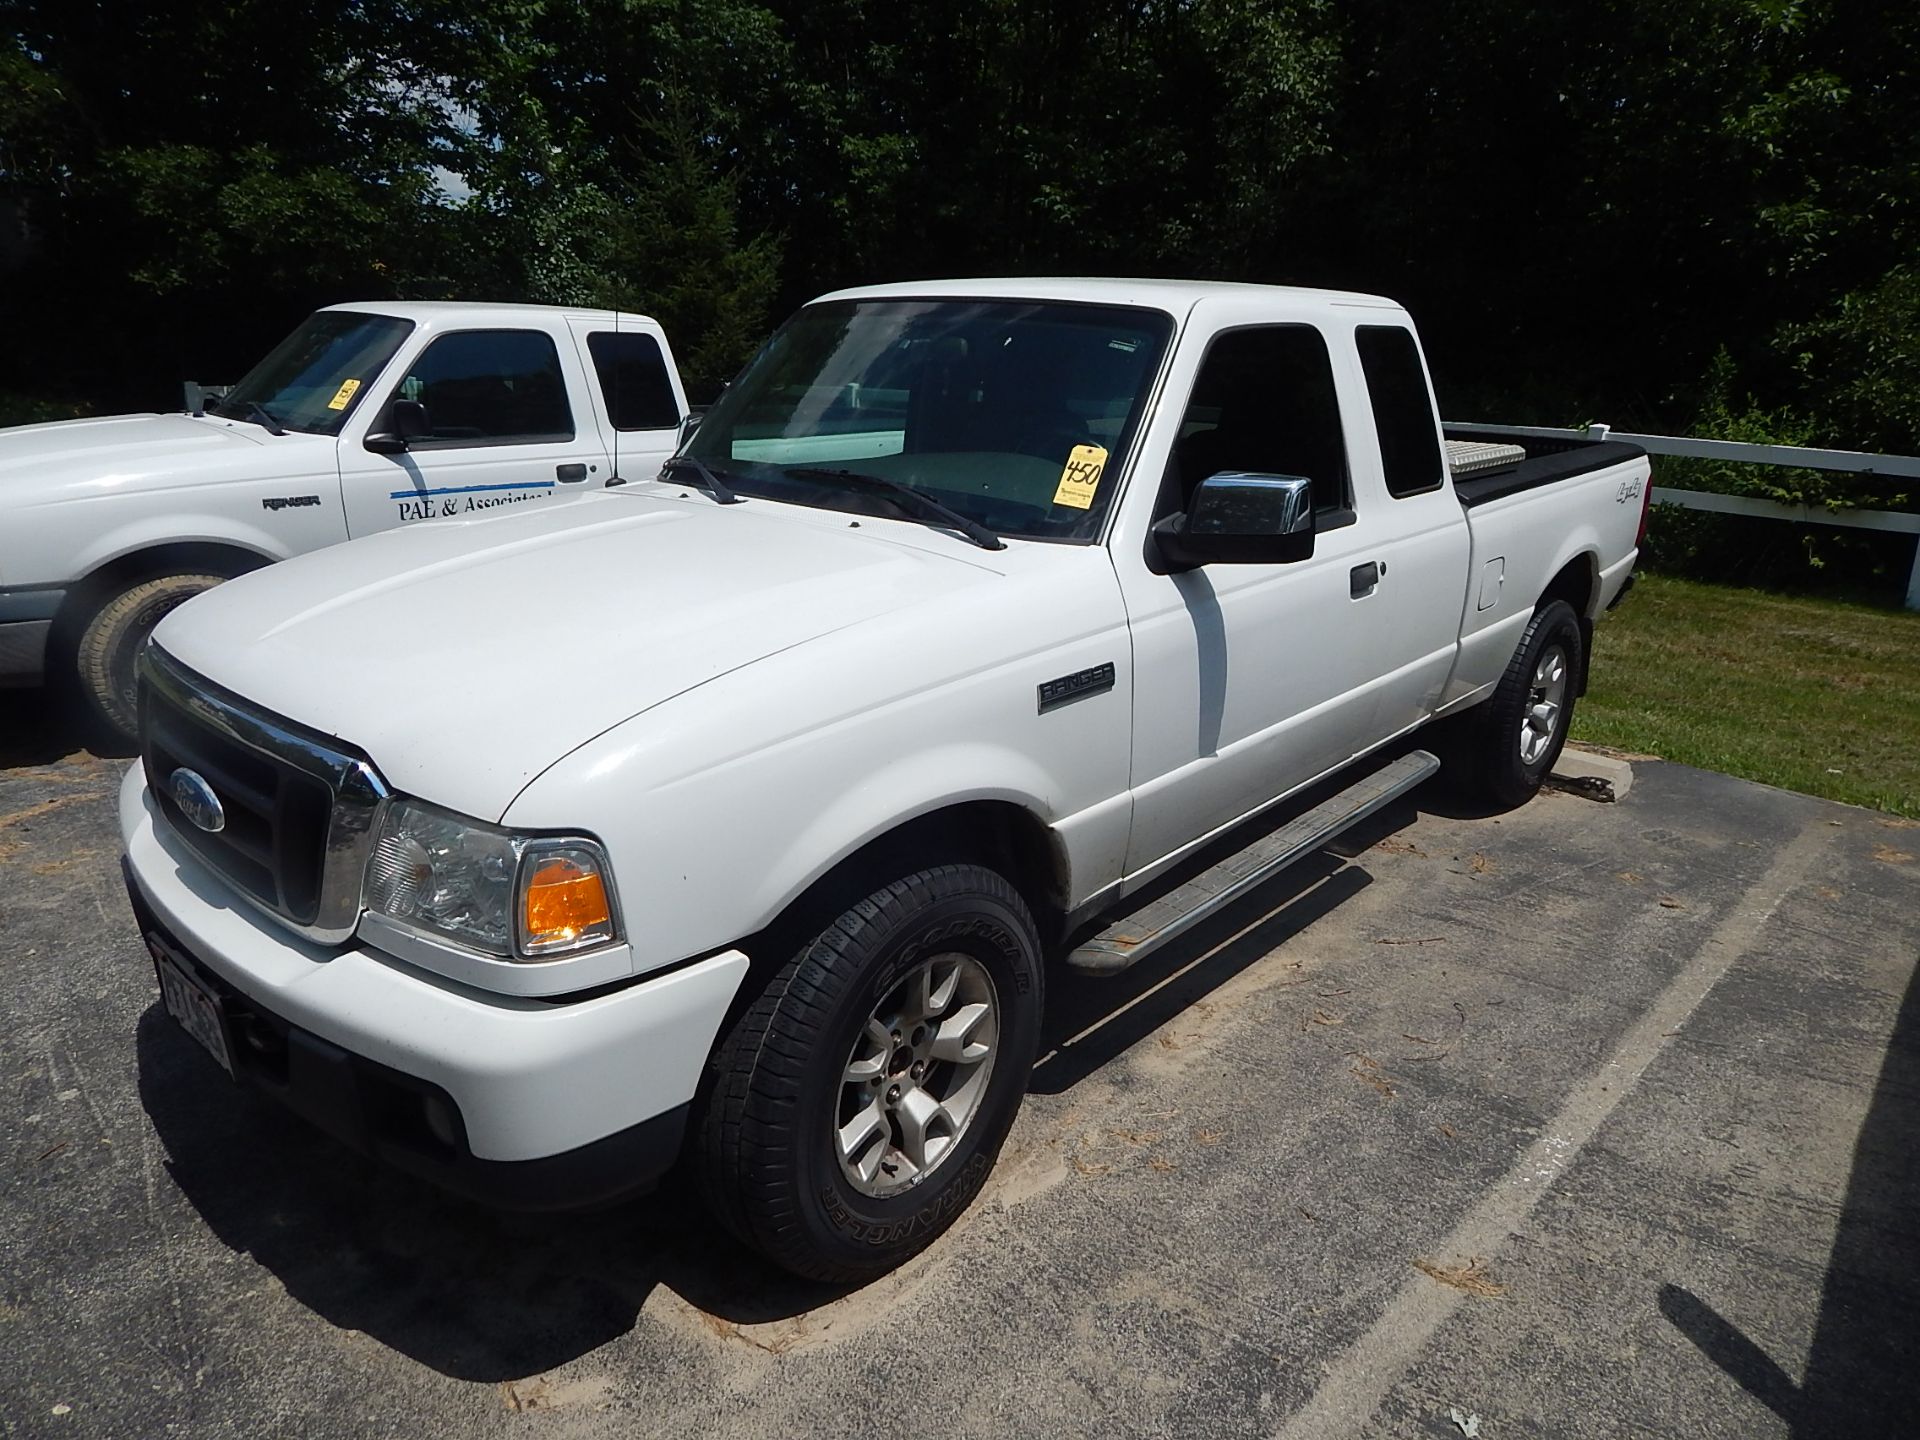 2006 Ford Ranger XLT Pick-Up, VIN 1FTZR15E57PAO1346, Extended Cab, 4WD Automatic, PW, PL, A/C, Am/